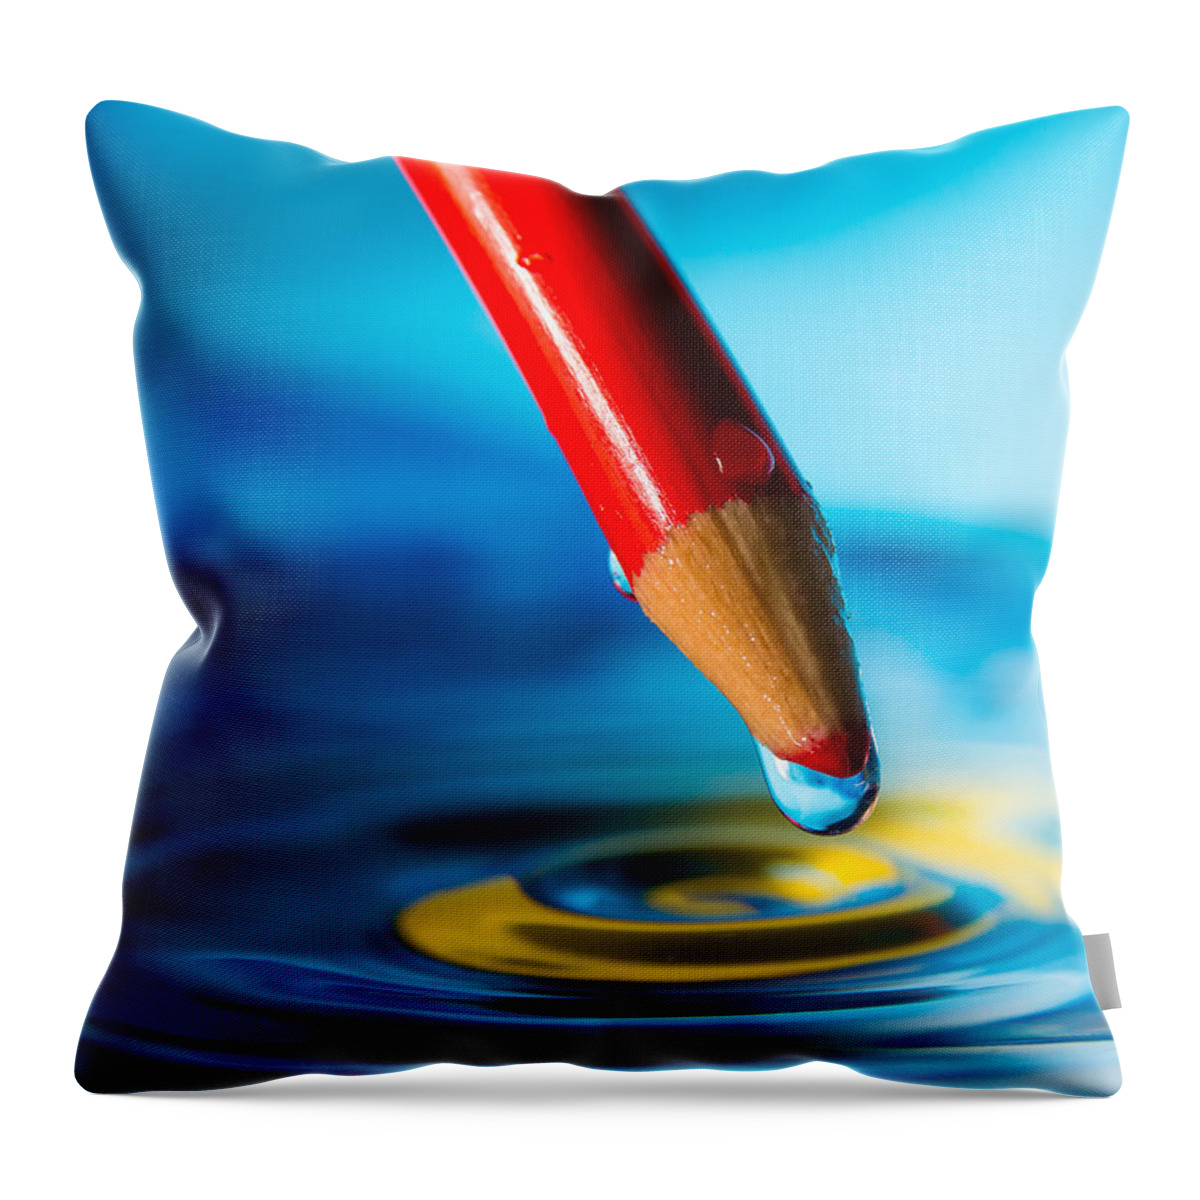 Abstract Throw Pillow featuring the photograph Pencil Water Drop by Alissa Beth Photography